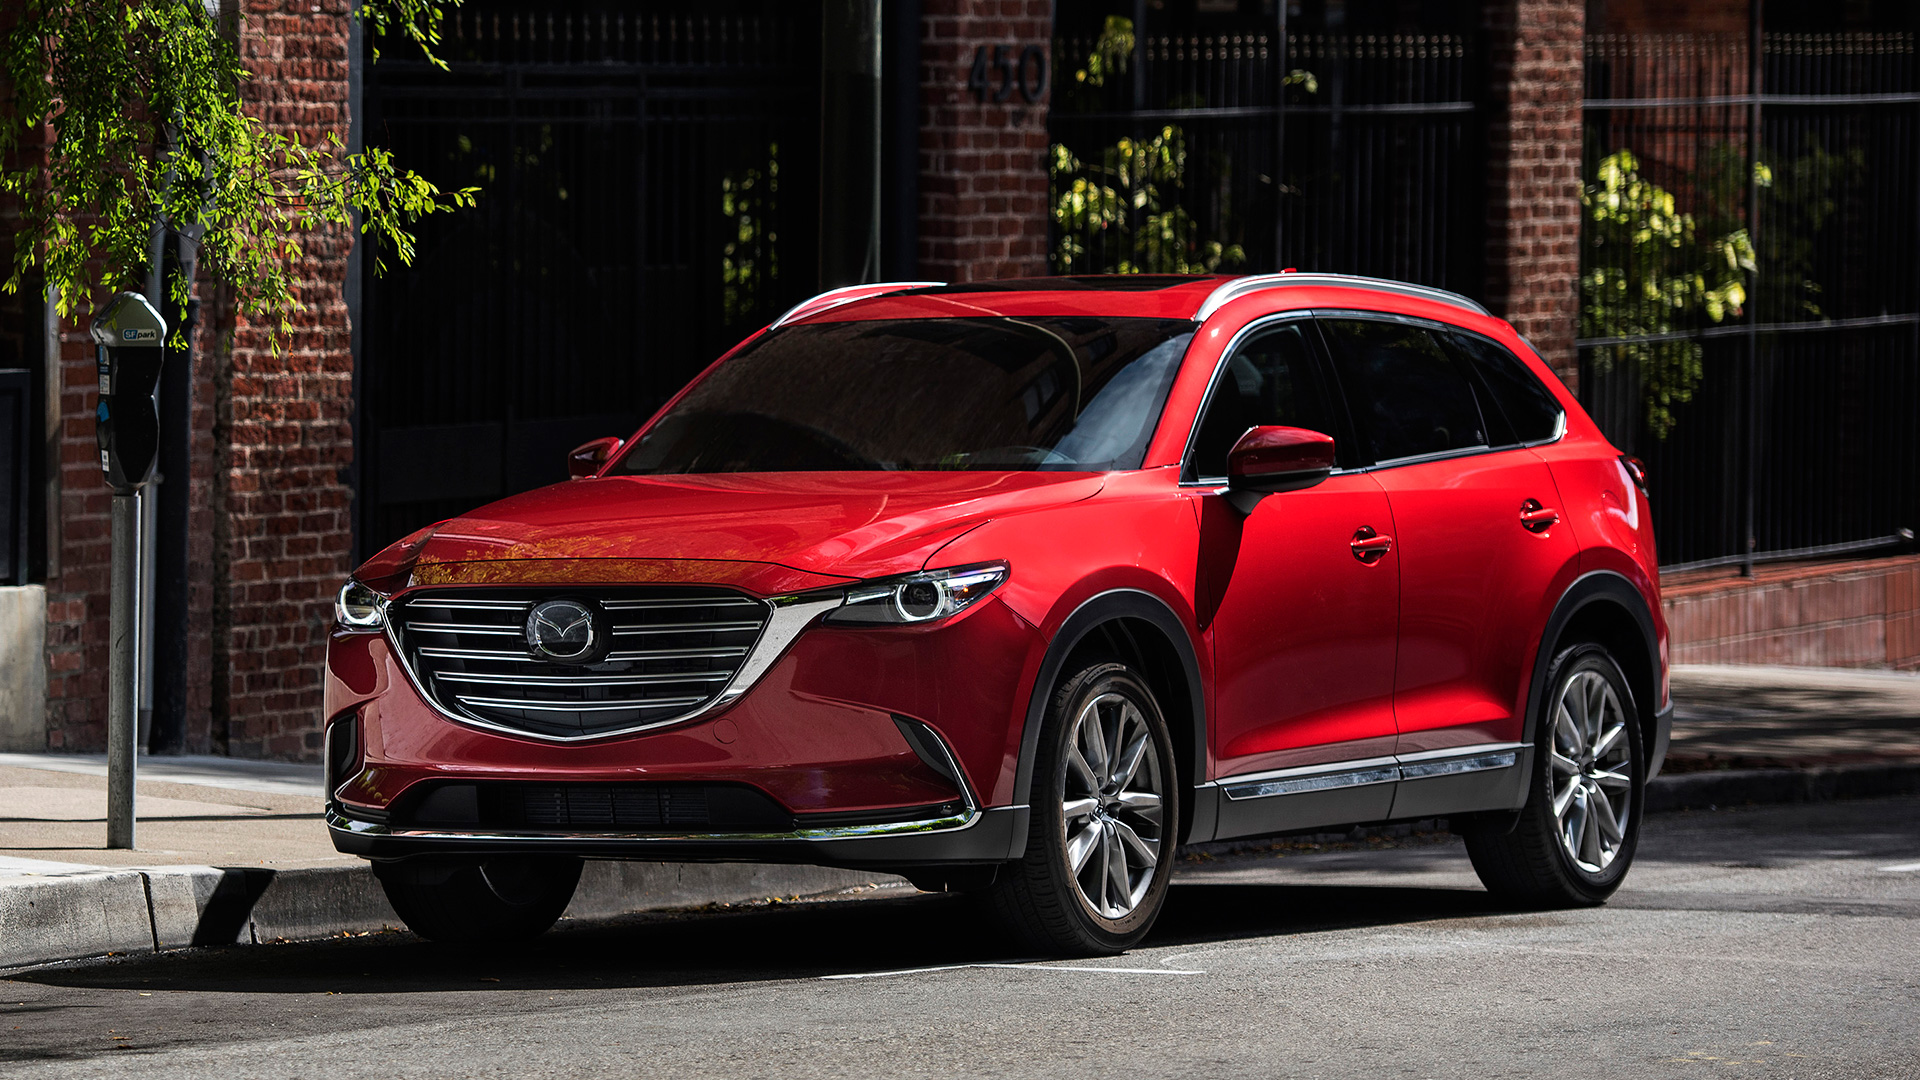 The Mazda CX-9 Grand Touring Is the Anti-SUV Crossover of Choice